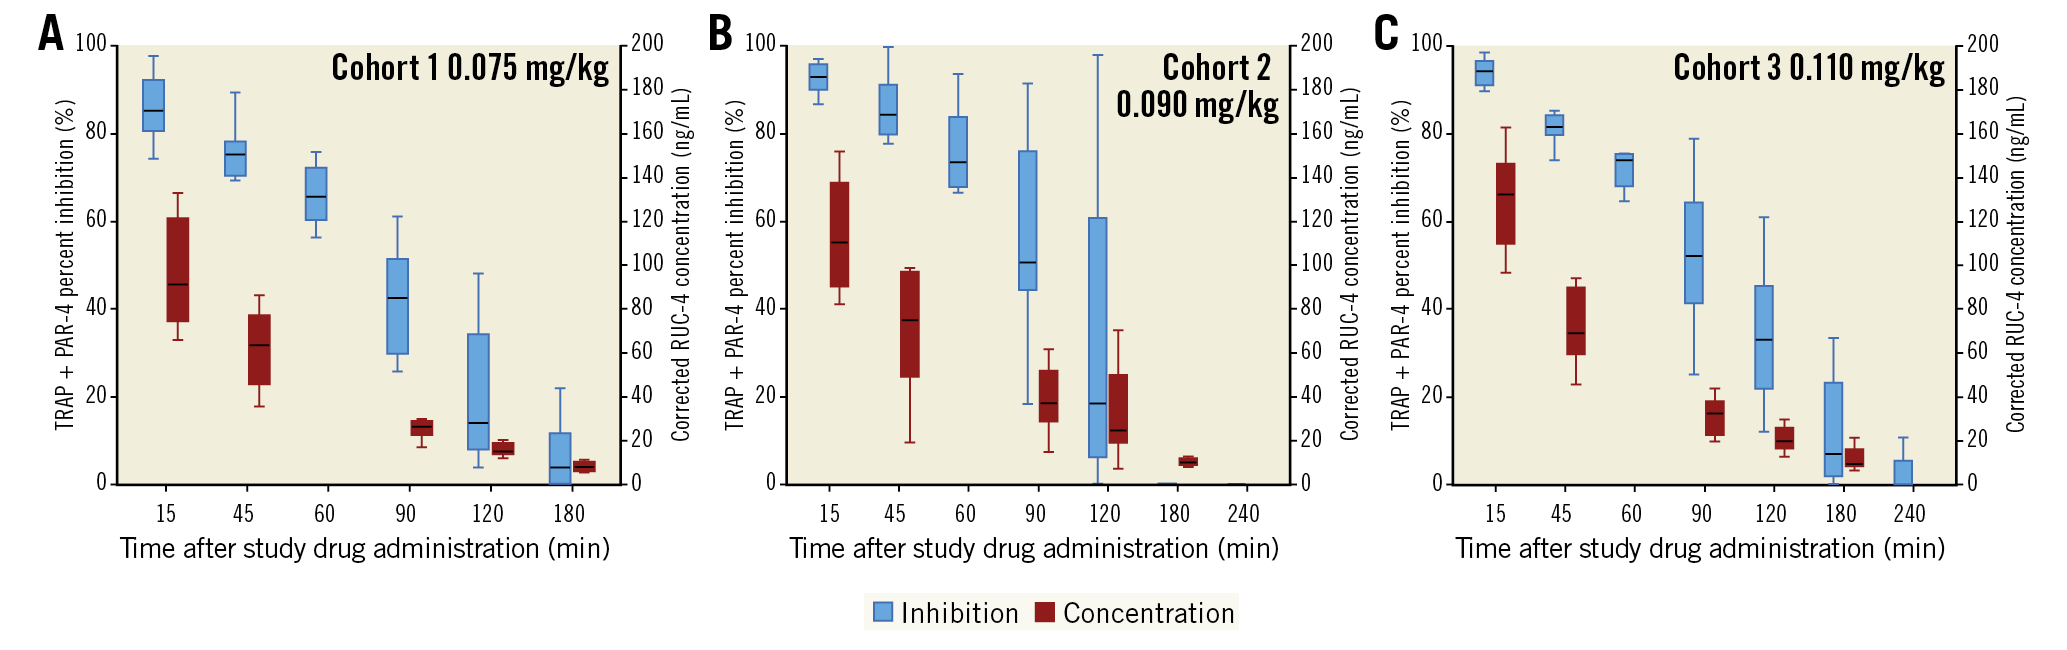 Figure 3. RUC-4 pharmacokinetics and pharmacodynamics using the Base assay. Platelet reactivity, assessed by VerifyNow and expressed as percent inhibition of the Base assay (blue box plots) up to 180 min (cohort 1) or 240 min (cohorts 2 and 3), and plasma concentration of RUC-4 (red) up to 180 min (cohorts 1, 2, and 3) following subcutaneous injection of RUC-4 at 0.075 mg/kg (A), 0.090 mg/kg (B) and 0.110 mg/kg (C). Box plots represent the lower (25th) quartile, median, and upper (75th) quartile. IQR: interquartile range; PAR-4: protease-activated receptor 4; TRAP: thrombin receptor activating peptide